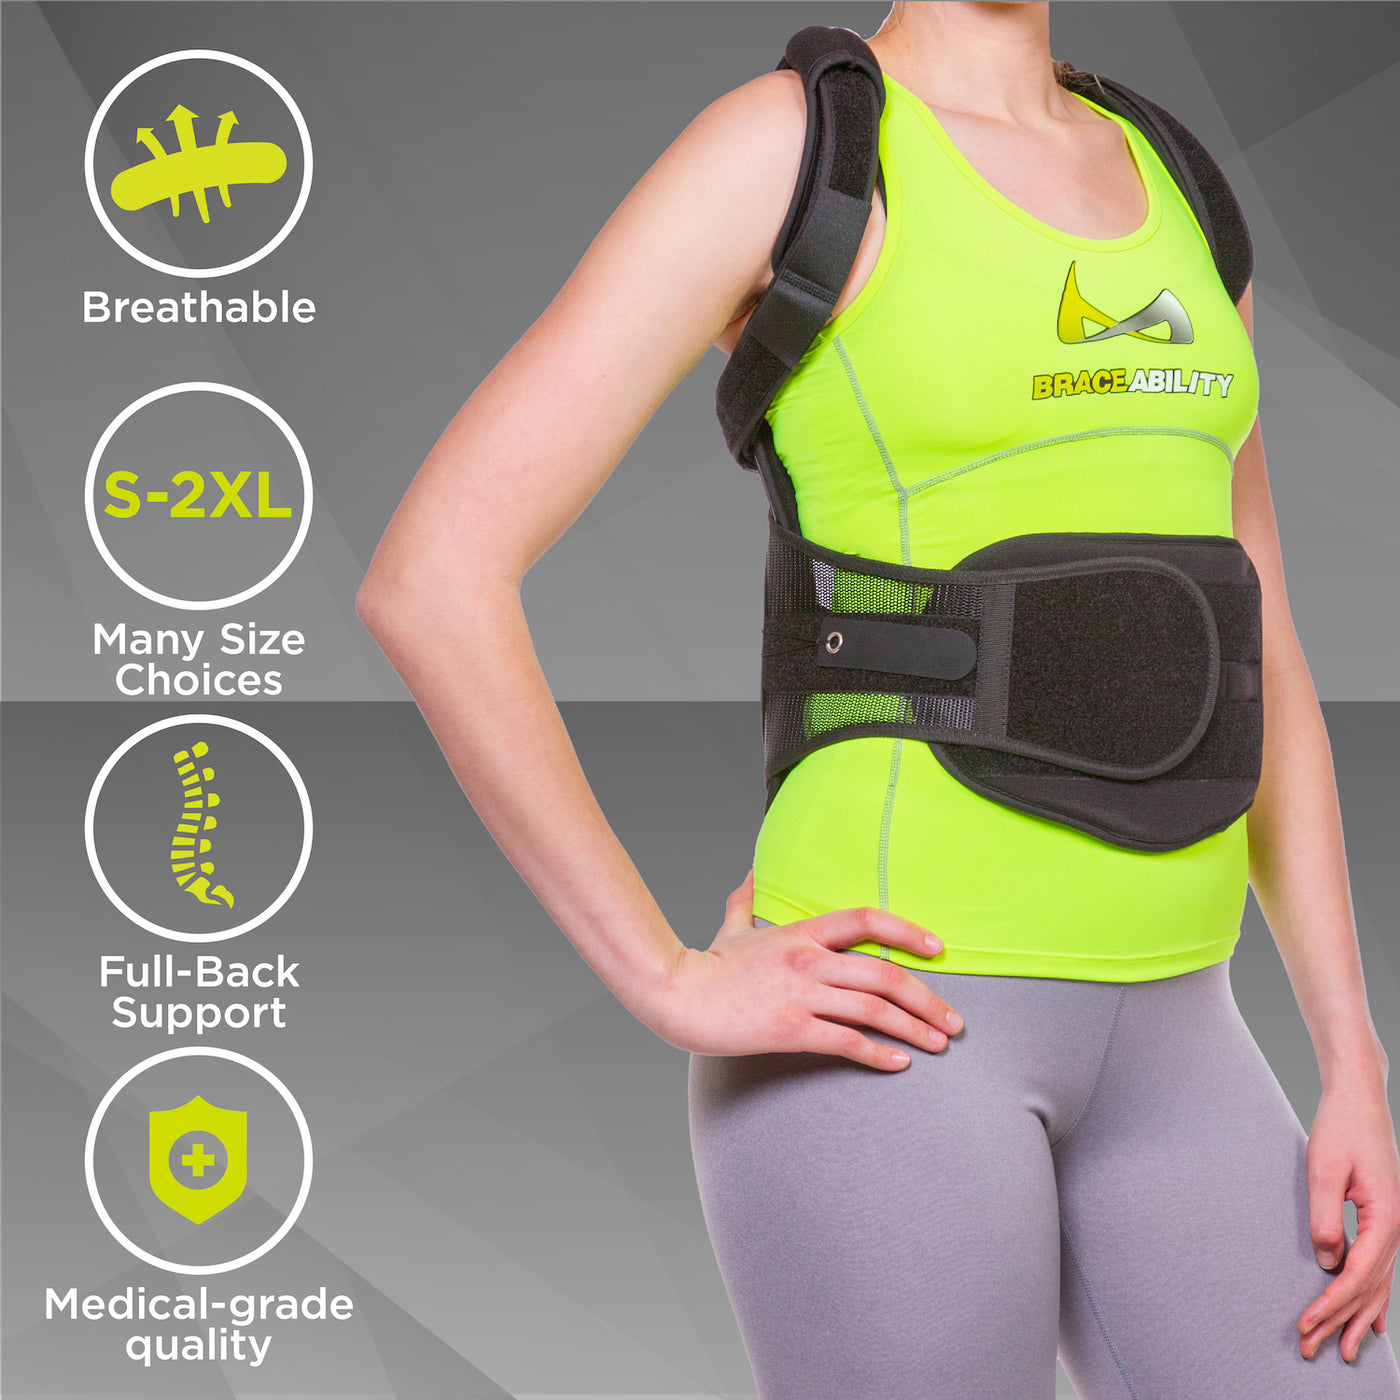 Can a Posture Corrector Fix Kyphosis? – BackEmbrace